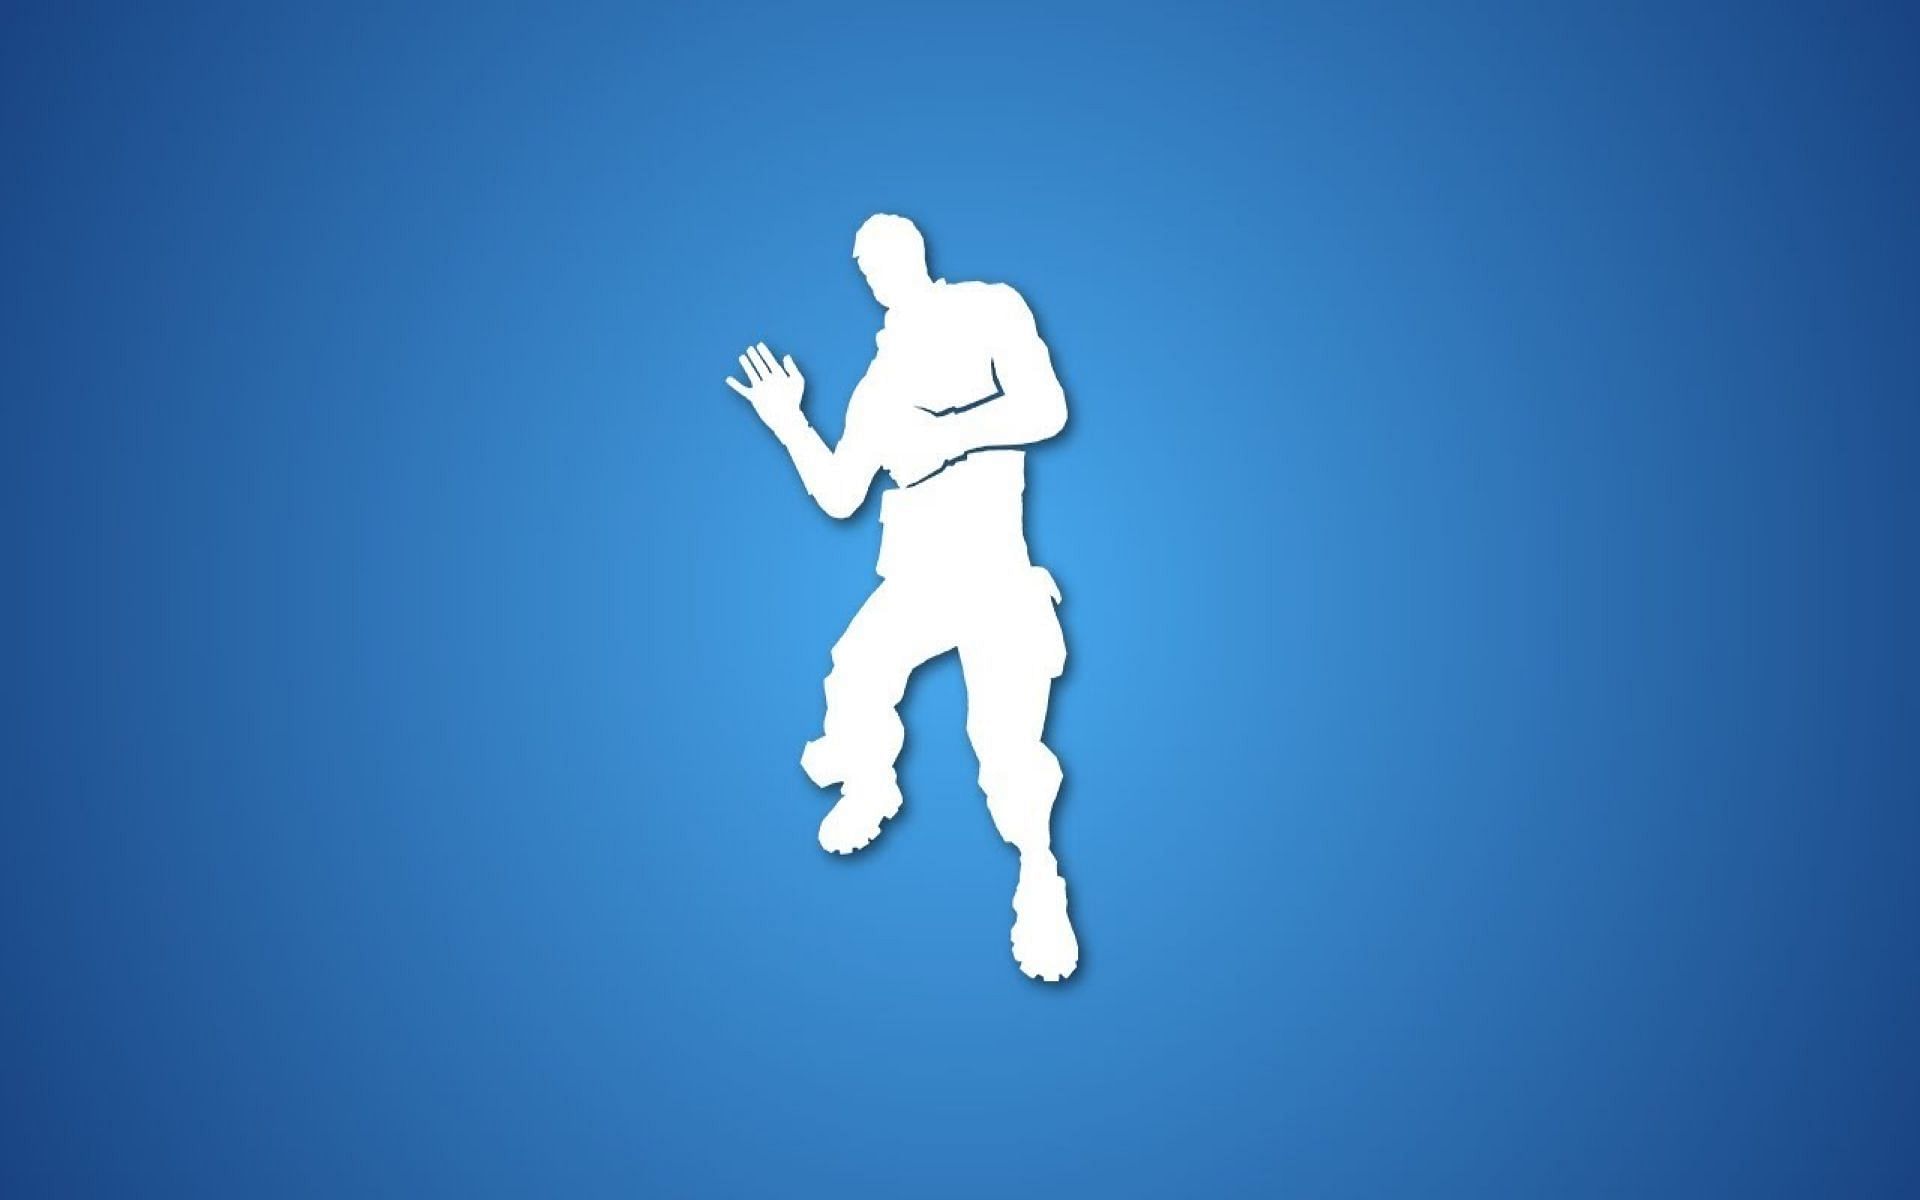 Gamers use Laugh It Up emote to disrespect opponents in the game (Image via FortStats/YouTube)